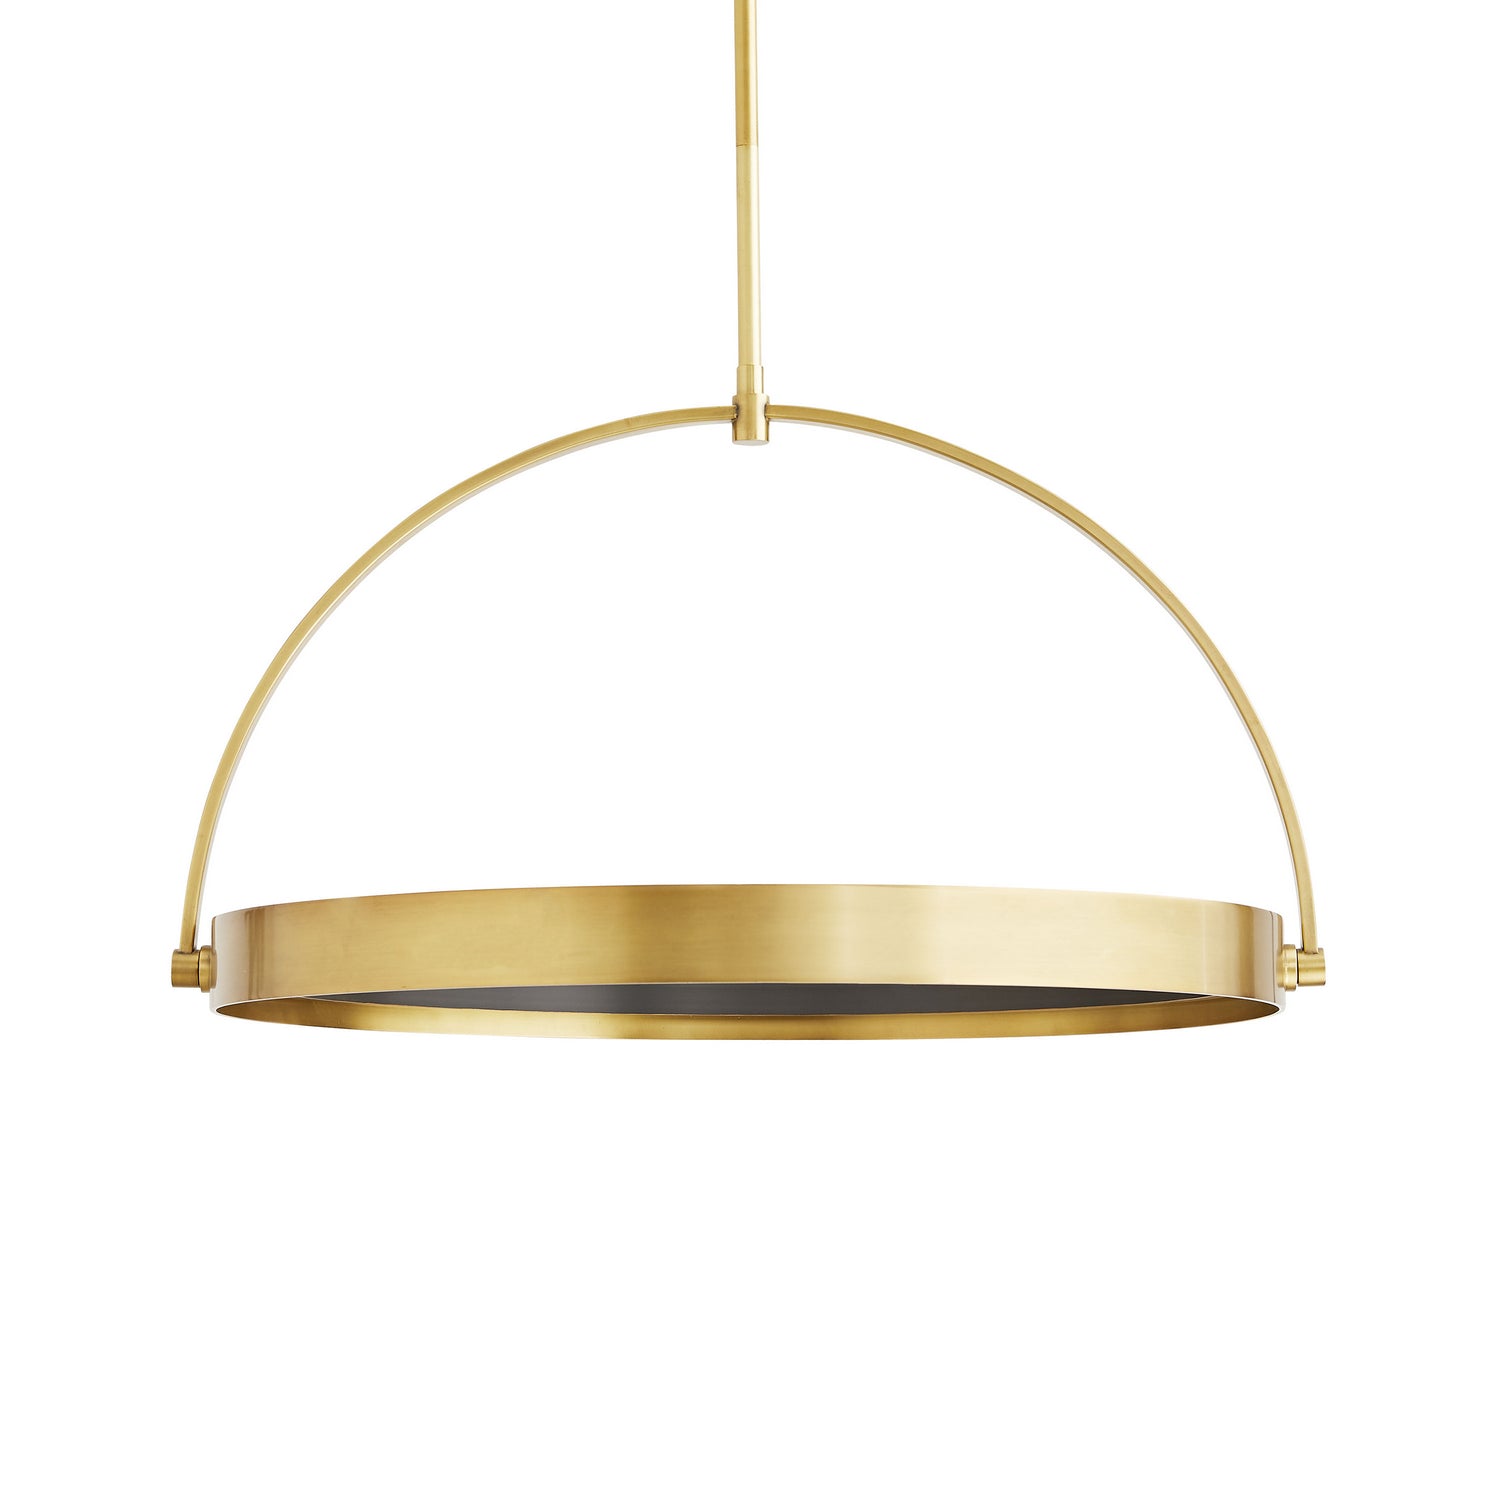 LED Pendant from the Fisk collection in Antique Brass finish